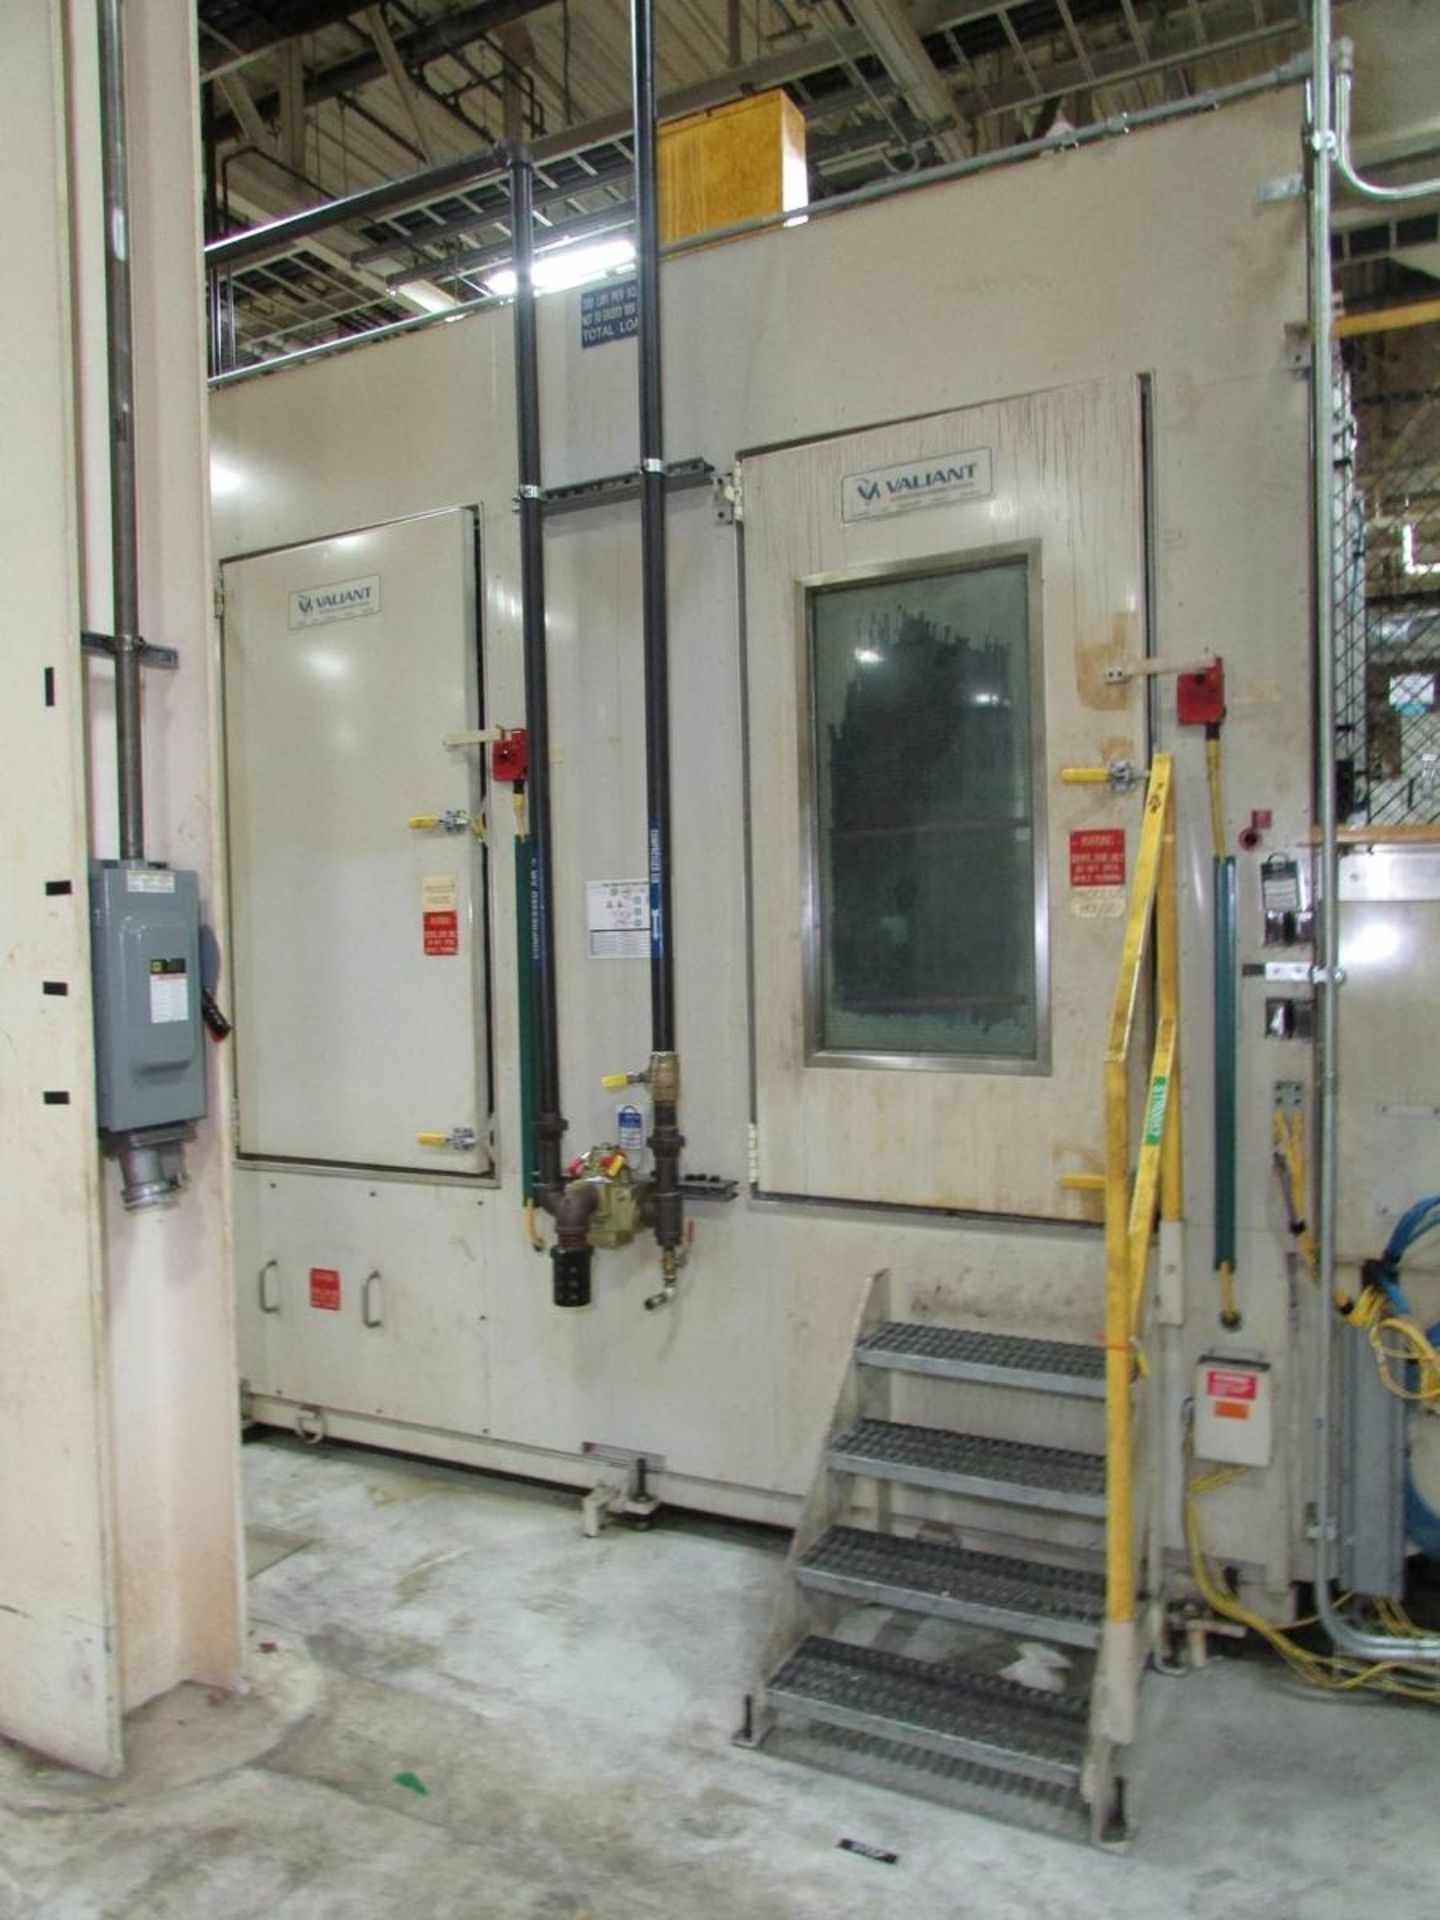 Valiant Robotic Twin Pallet Automatic High-Pressure Parts Deburr and Wash Machine - Image 18 of 30